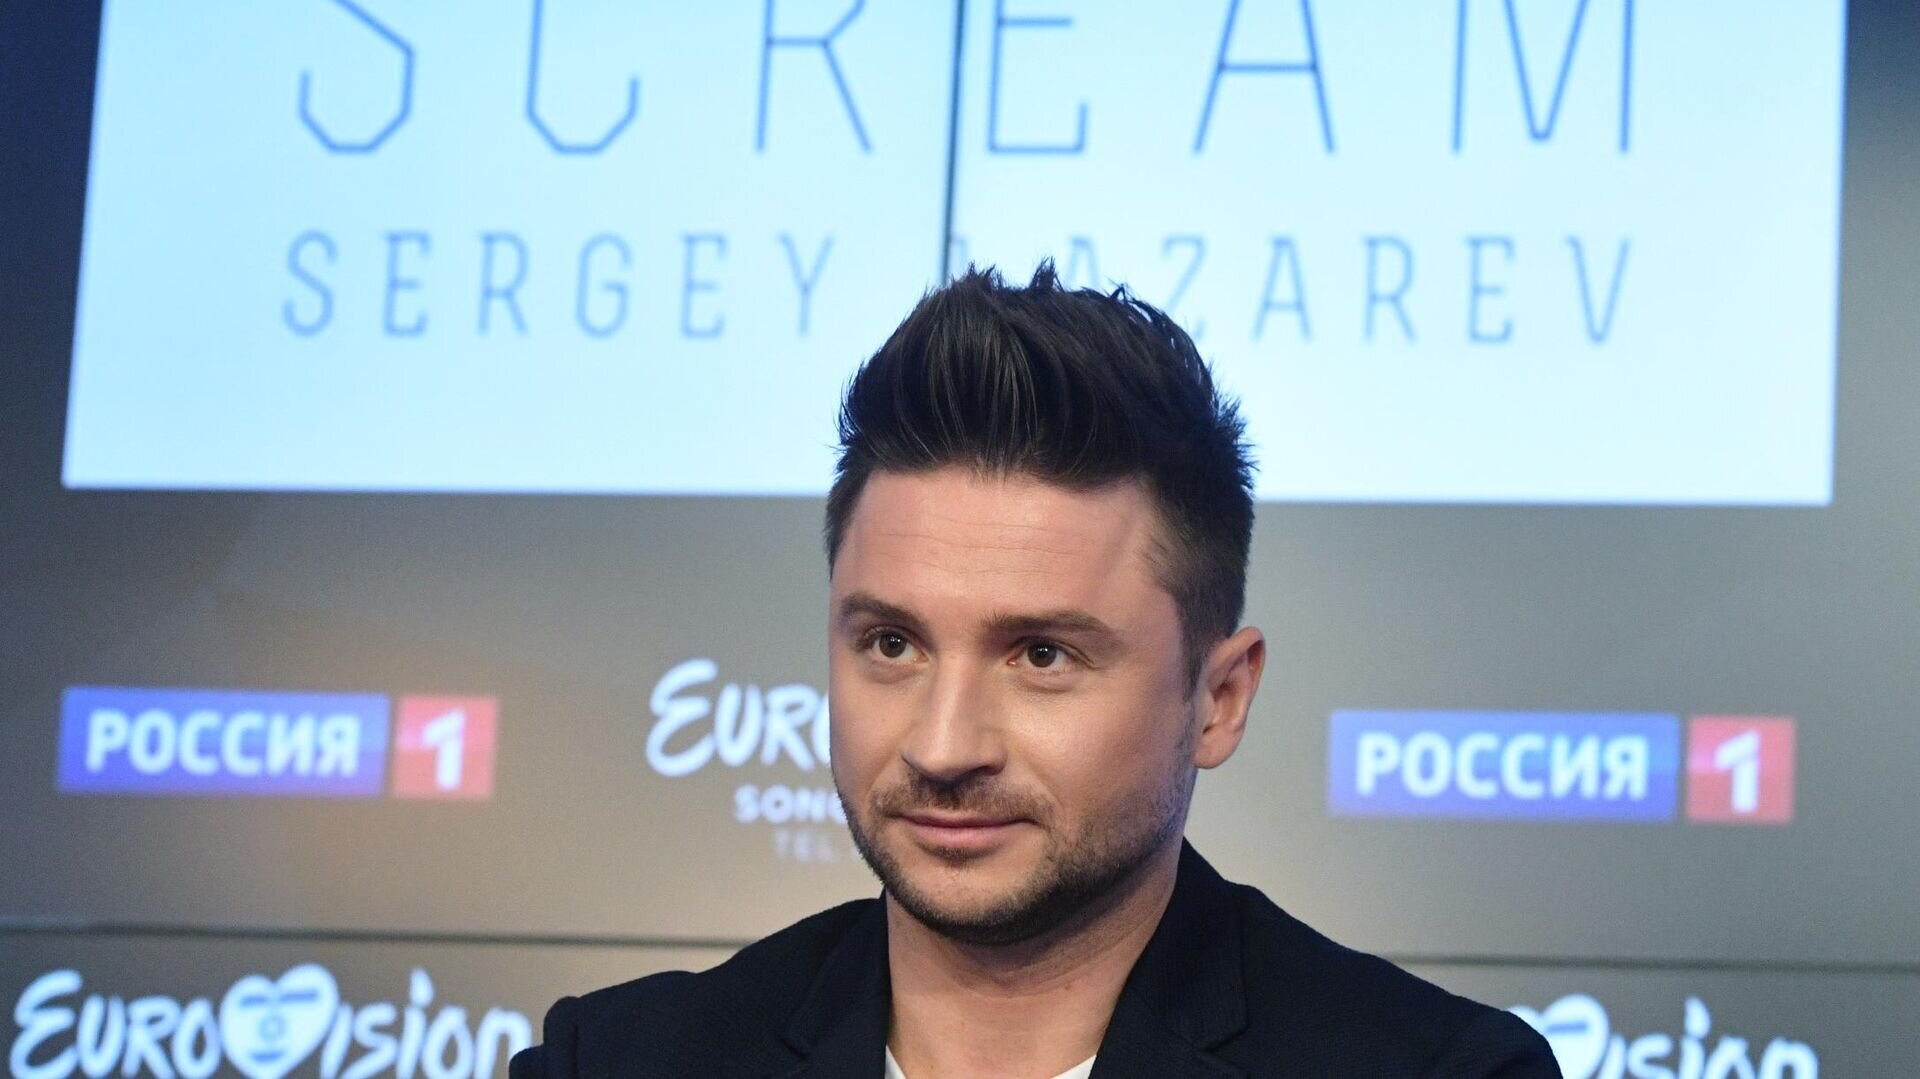 Sergey Lazarev made a statement about the end of his career